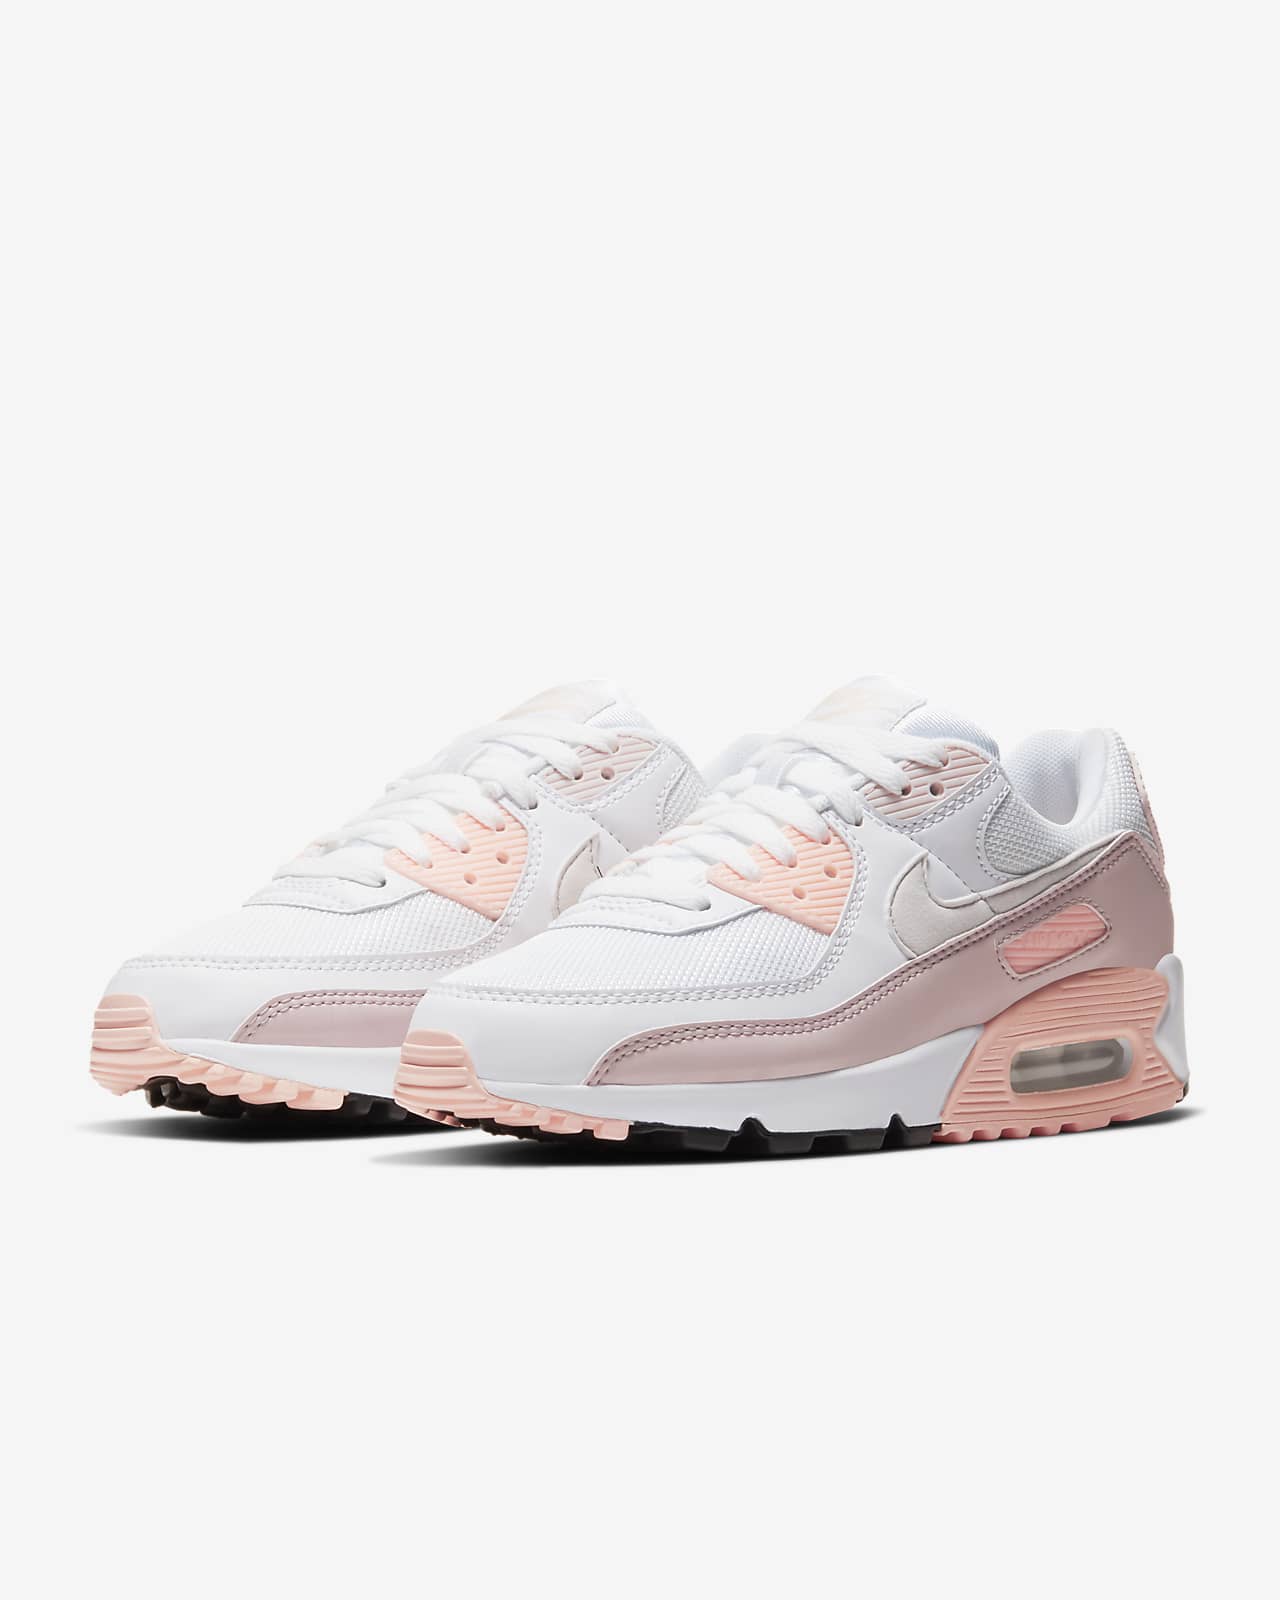 light pink air max 90, OFF 70%,Latest 